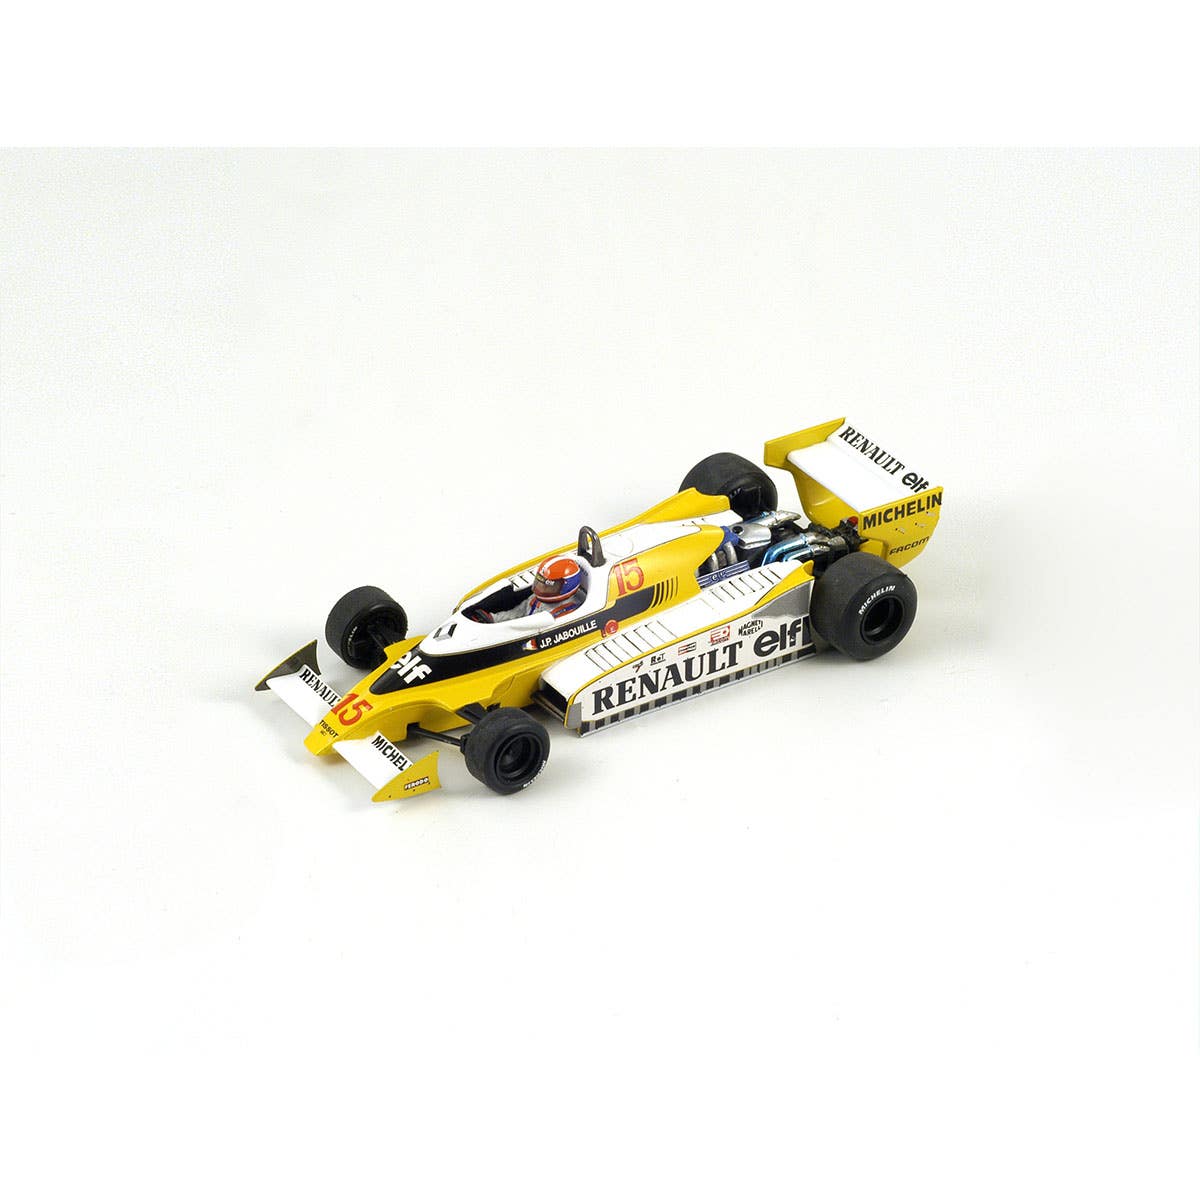 Renault RS11 No.15 Winner French GP 1979 - Jean-Pierre Jabouille - With Acrylic Cover - 1:18 Scale Resin Model Car